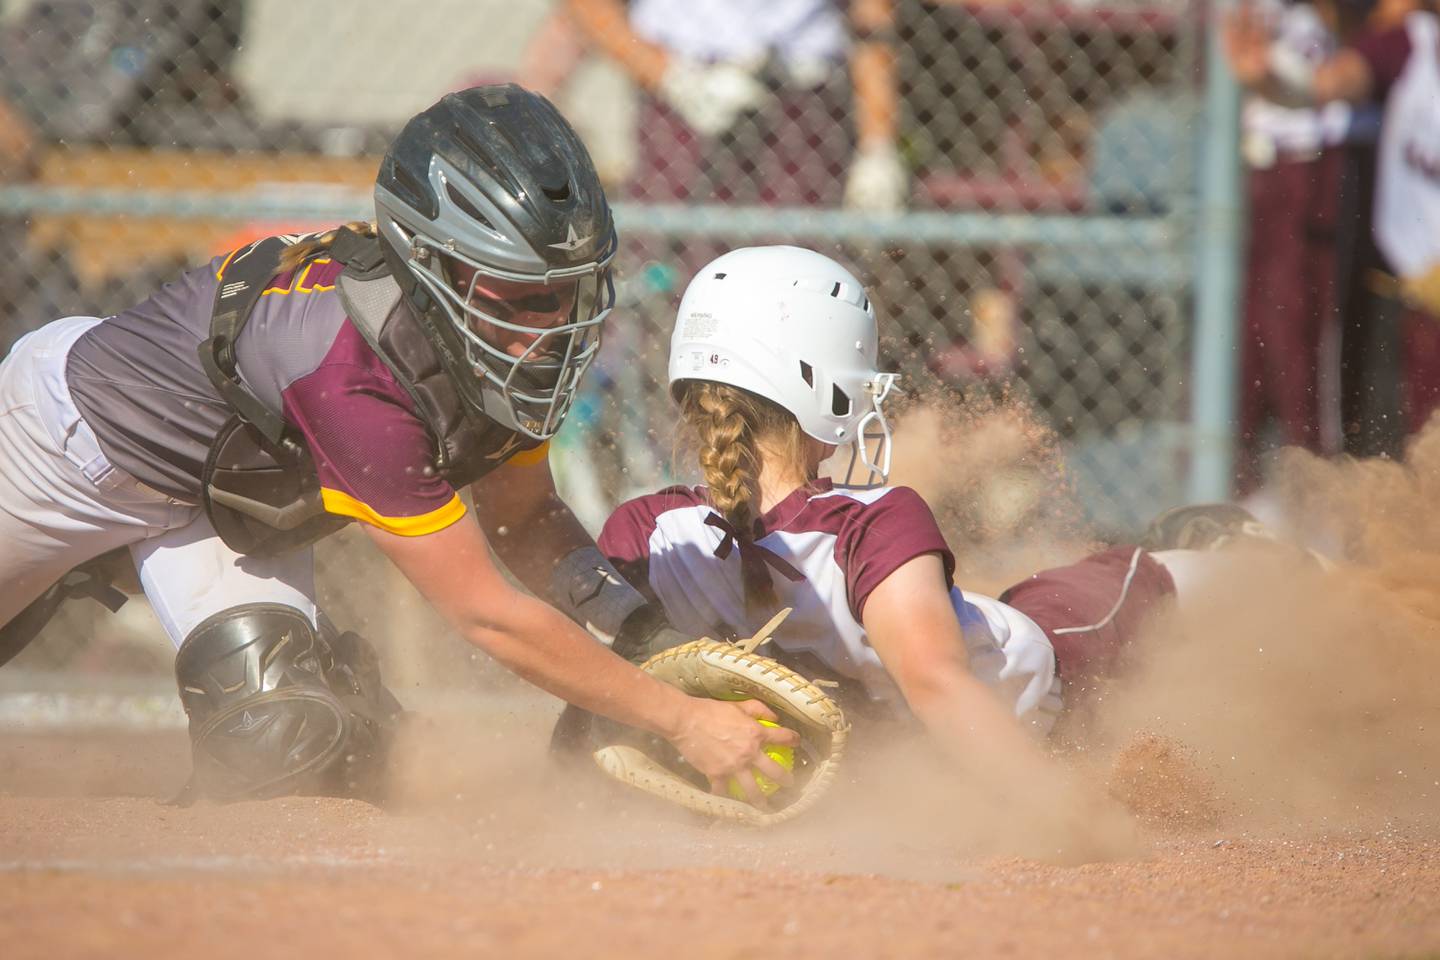 Marengo catcher Taylor Davison (16) finishes a tag of Marengo's Lilly Kunzer (10) at home plate in the third inning of the game at Richmond-Burton High School, Richmond, Ill., Friday, June 4, 2021. The Rockets won, 11-9, and will play the winner of the Oregon Regional Tuesday, June 8.